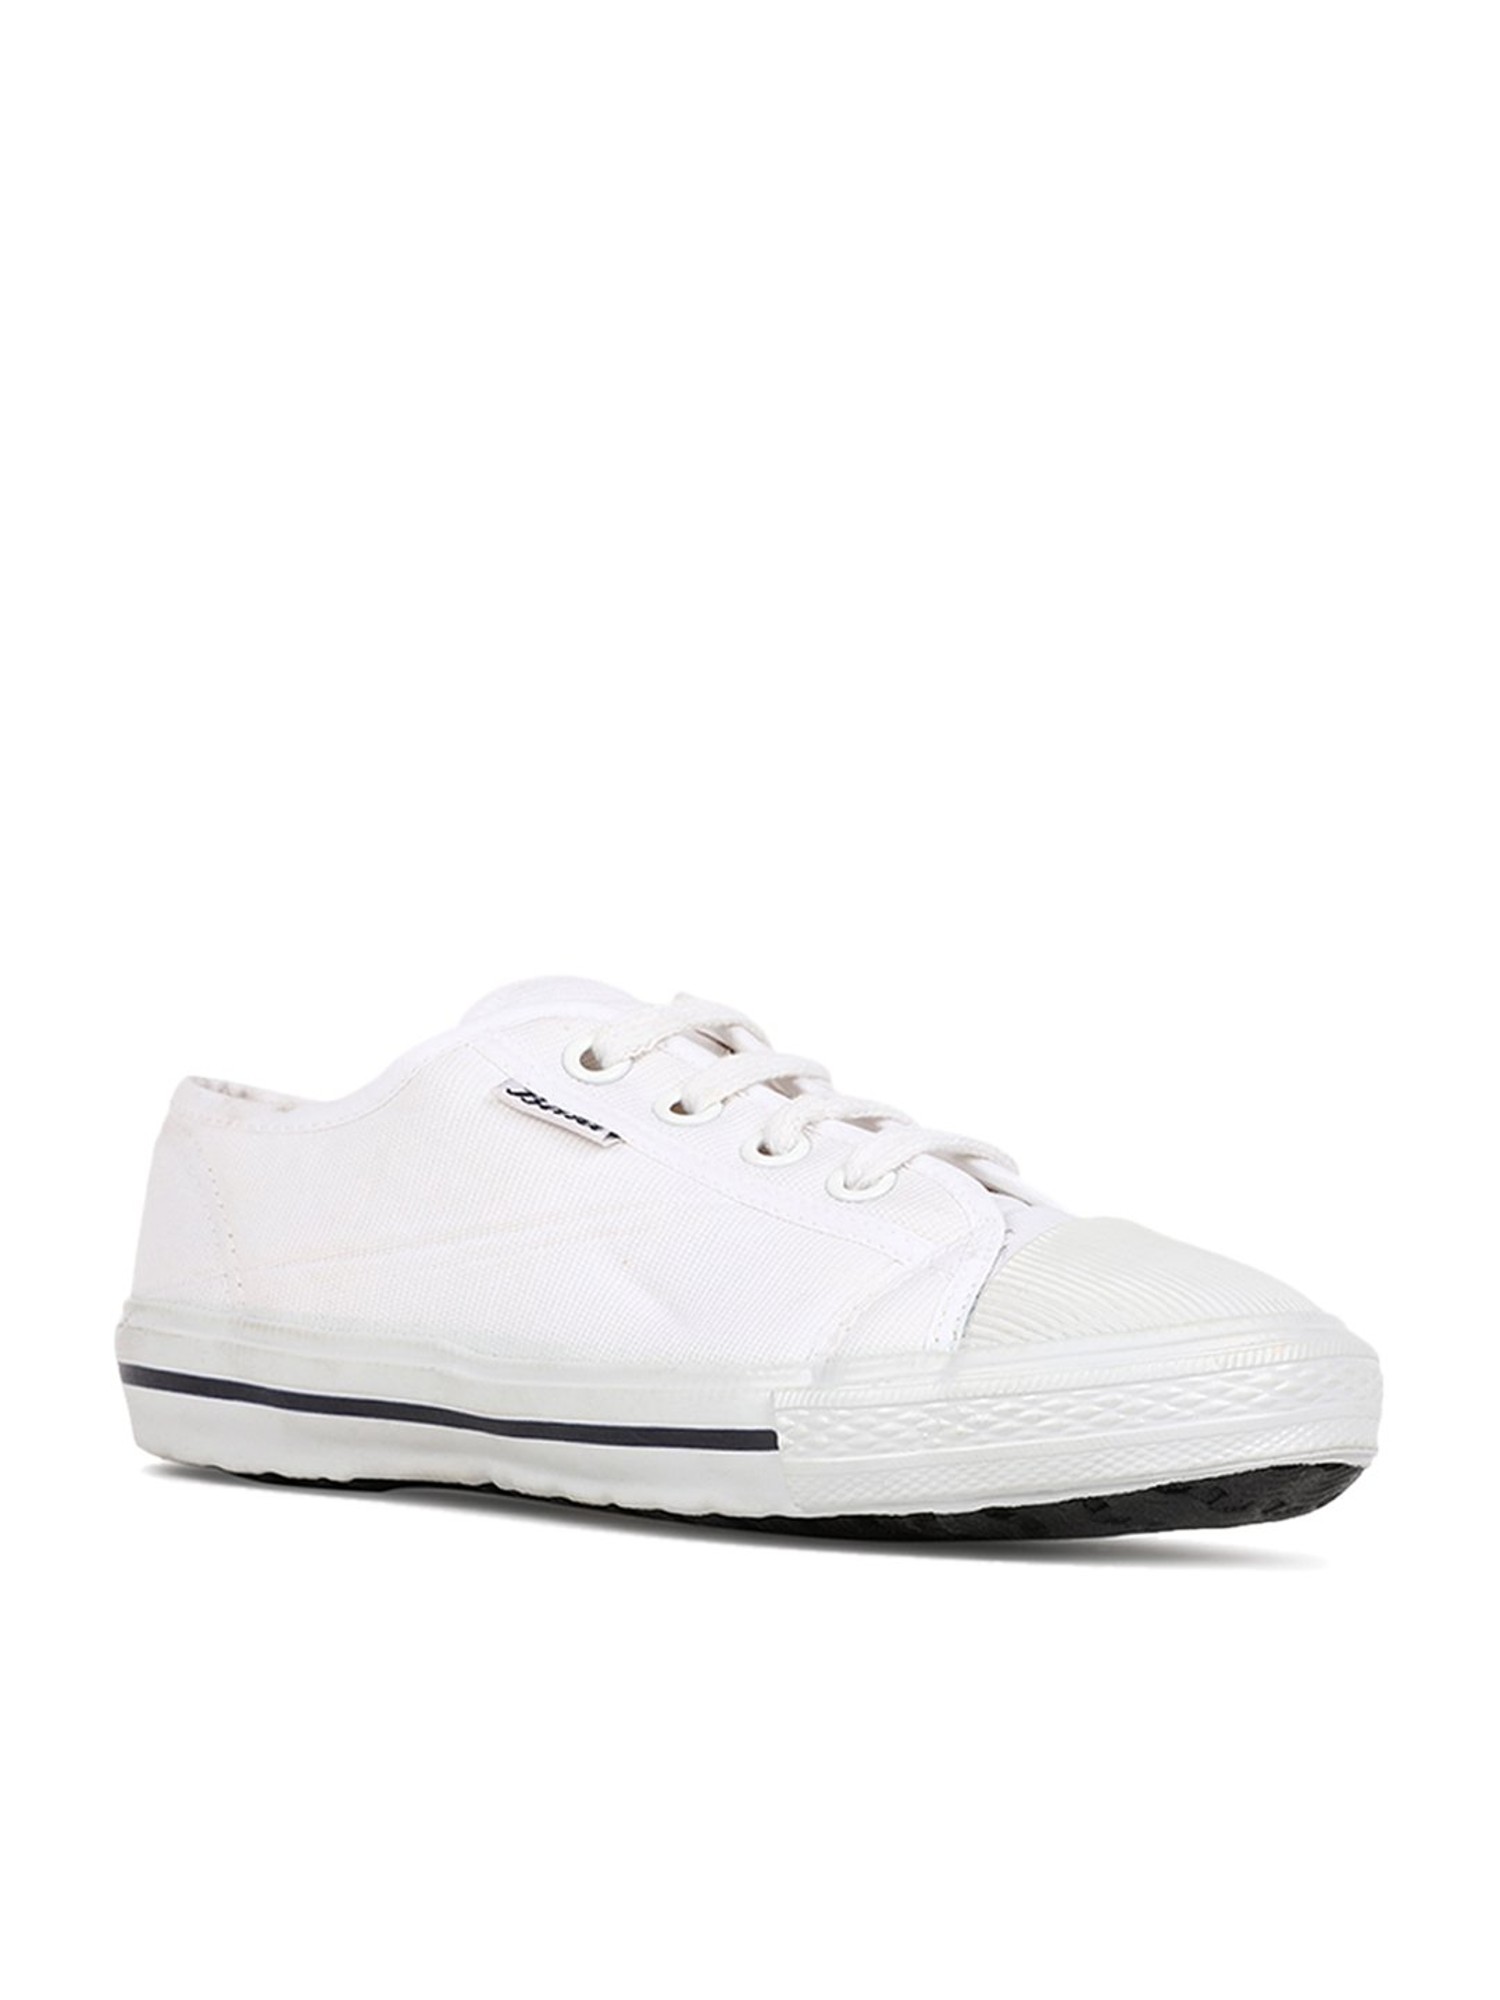 Buy North Star by Bata Blue Flat Ballets for Women at Best Price @ Tata CLiQ